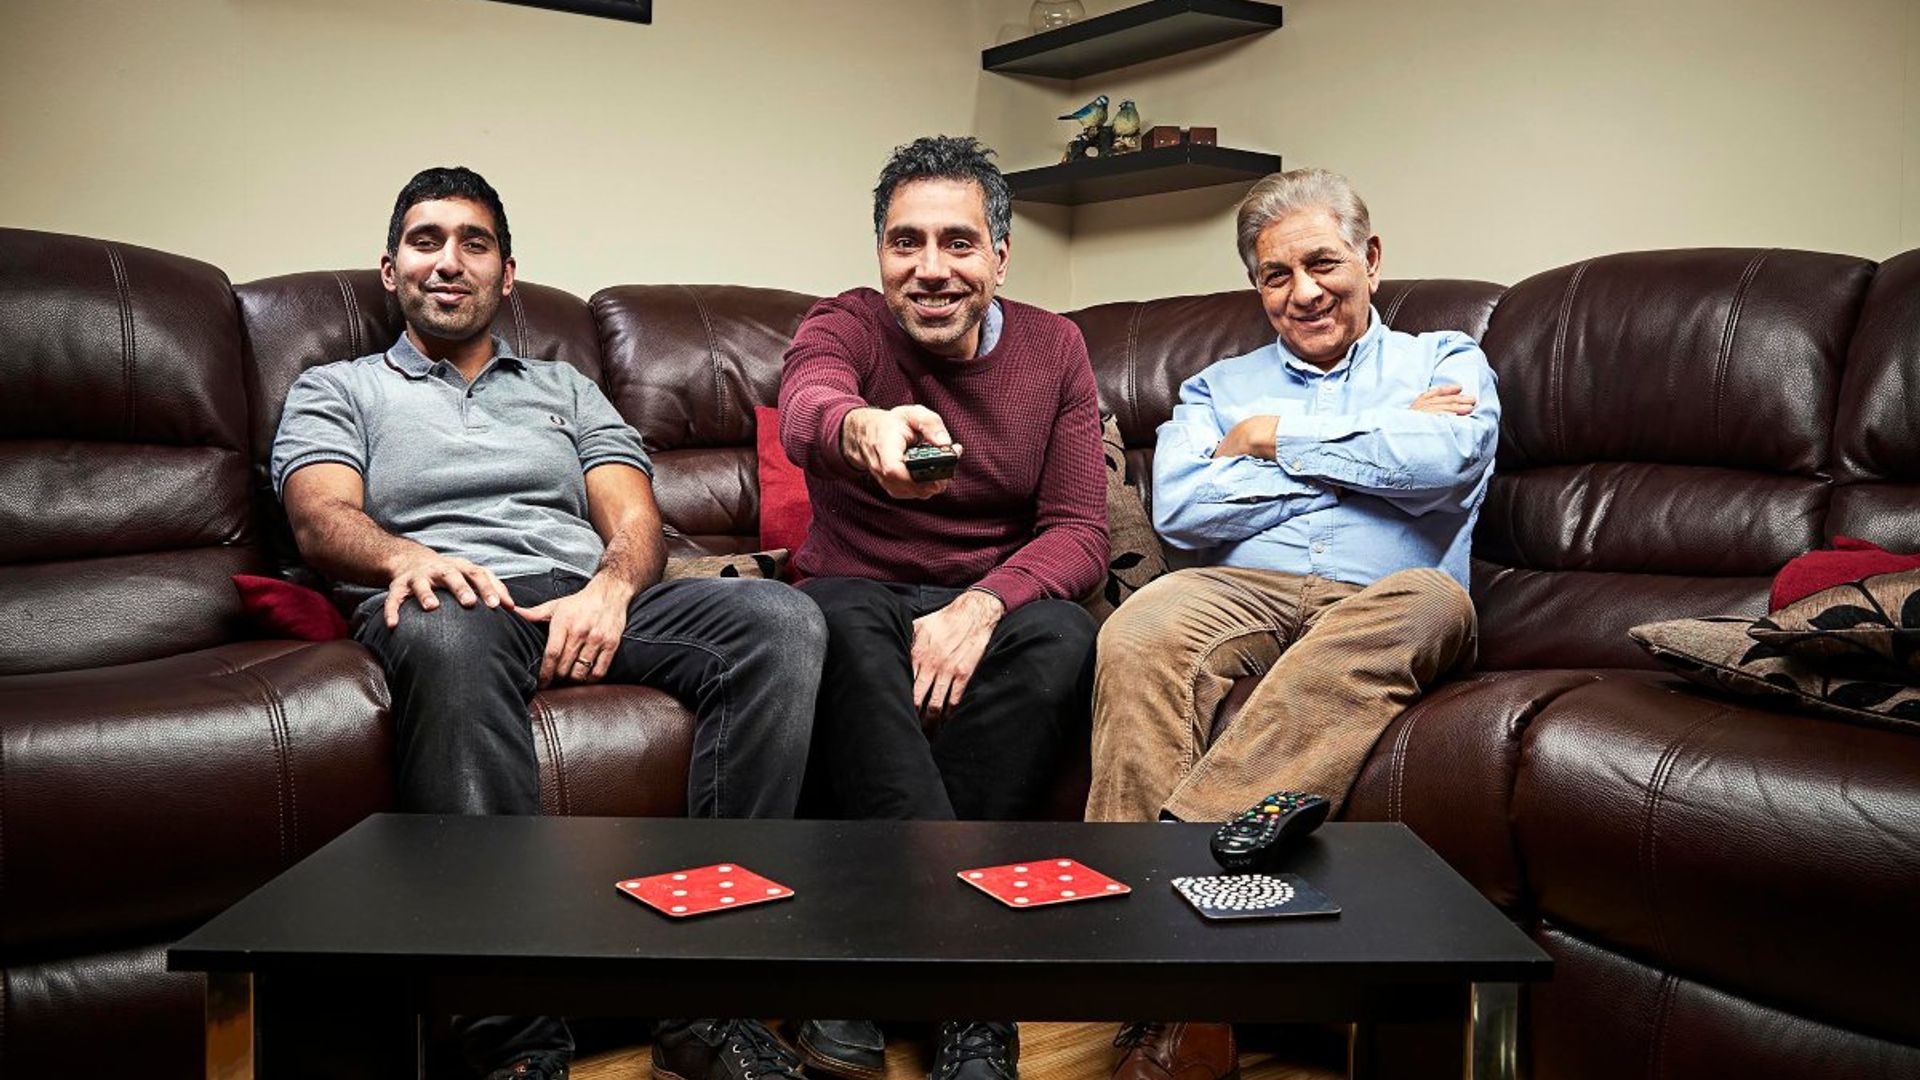 Gogglebox star confirms return to upcoming series in September